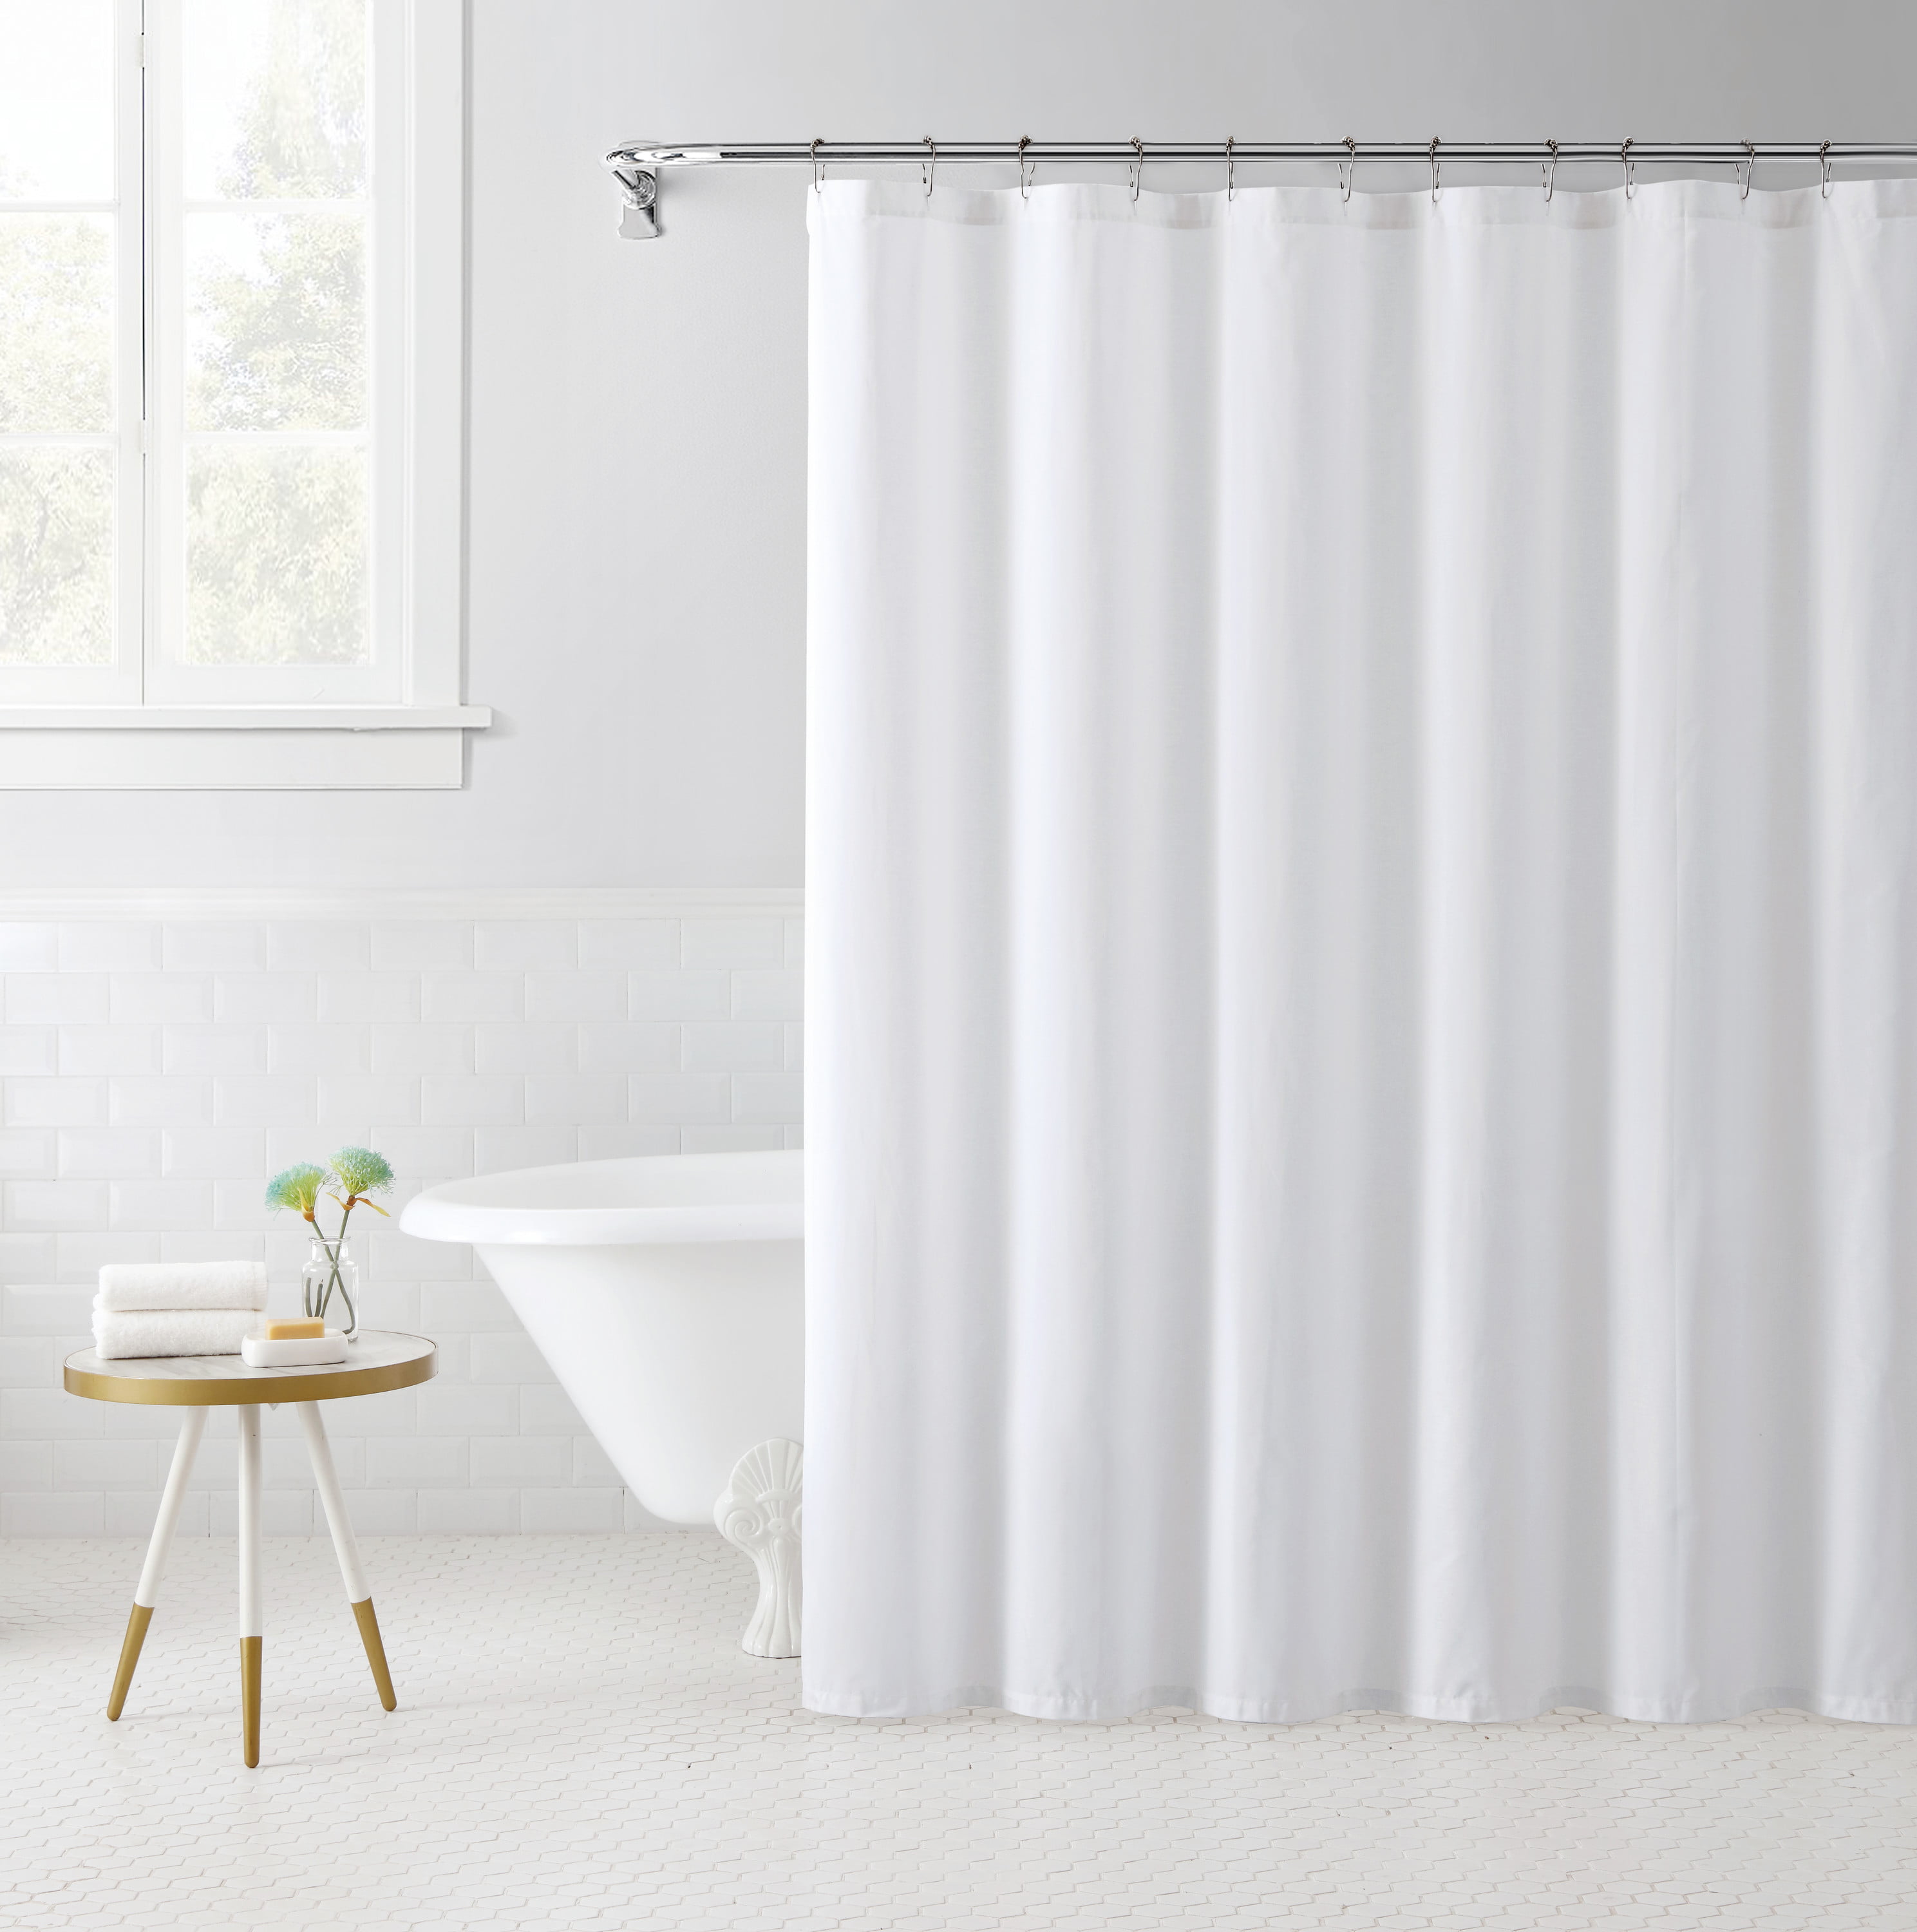 Freshee Fabric Shower Curtain With, Linen Shower Curtain Target